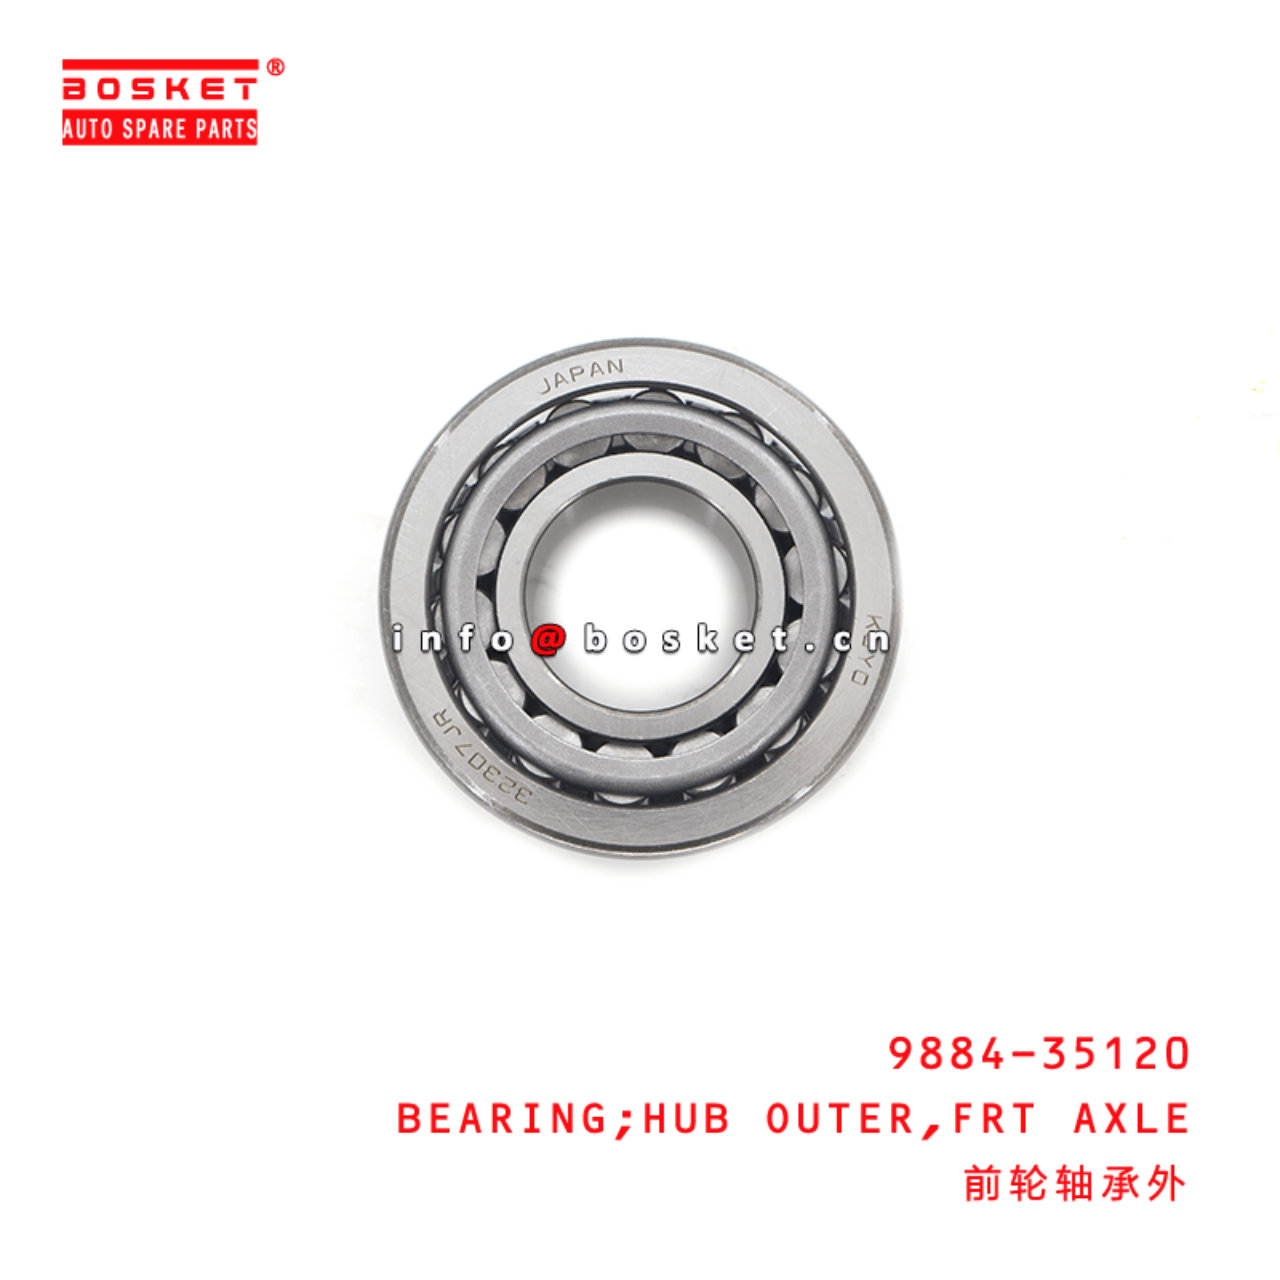  9884-35120 Front Axle Hub Outer Bearing Suitable For HINO300